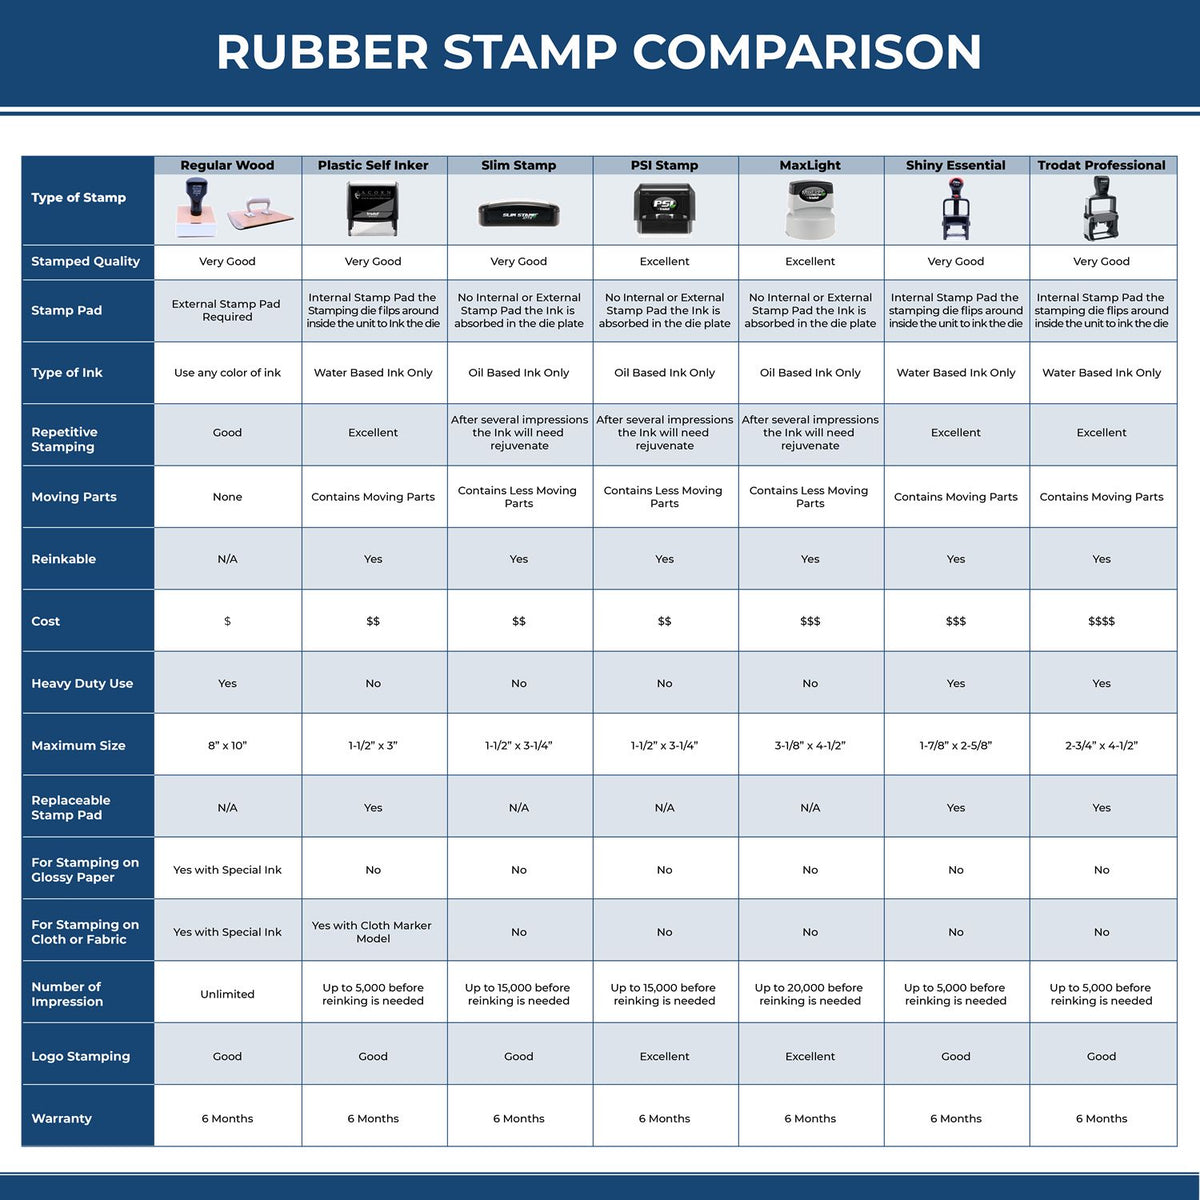 A comparison chart for the different types of mount models available for the Guam Professional Engineer Seal Stamp.